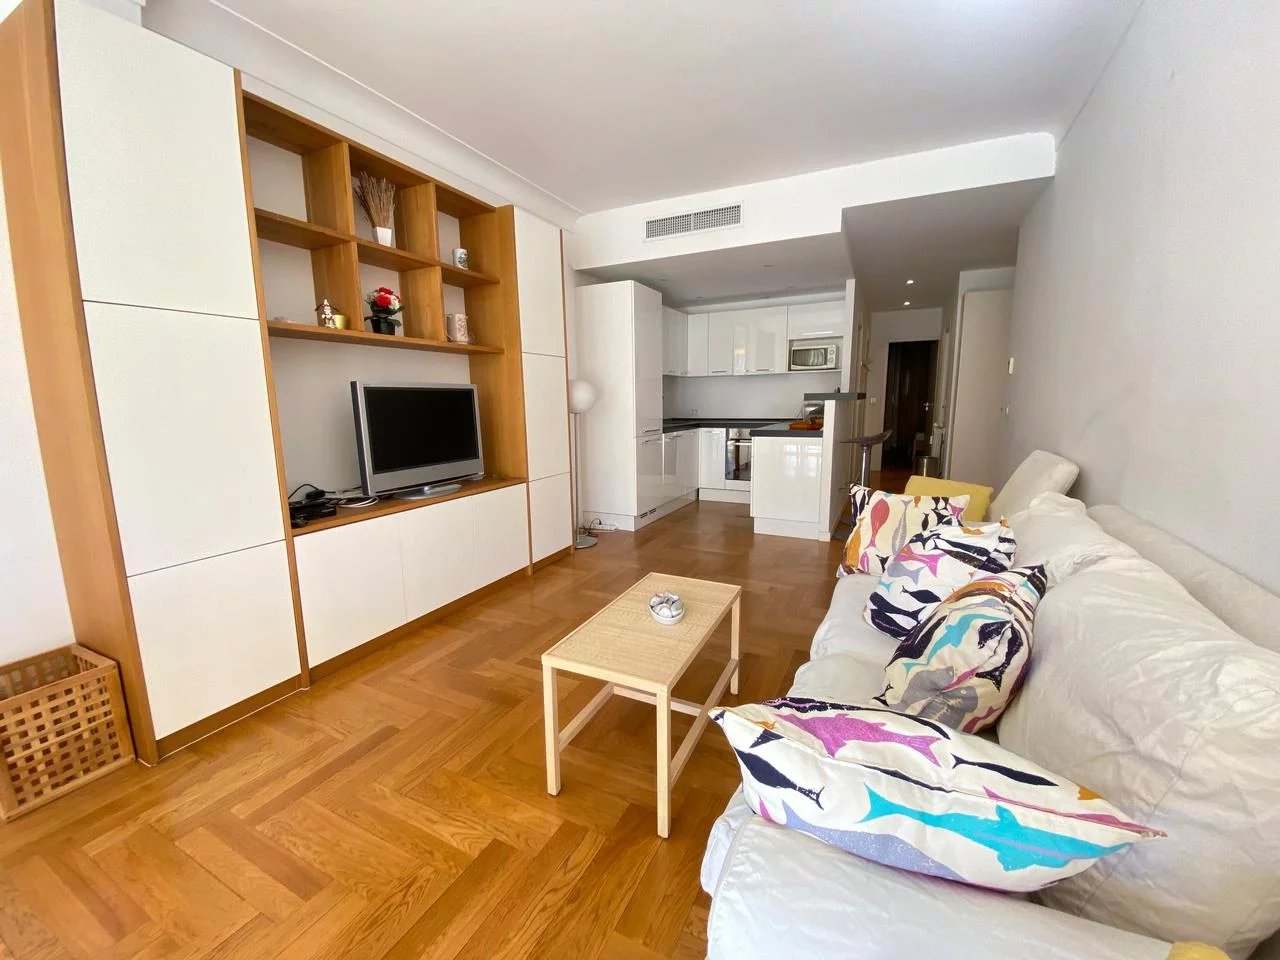 Appartement  3 Rooms 61.65m2  for sale   720 000 €